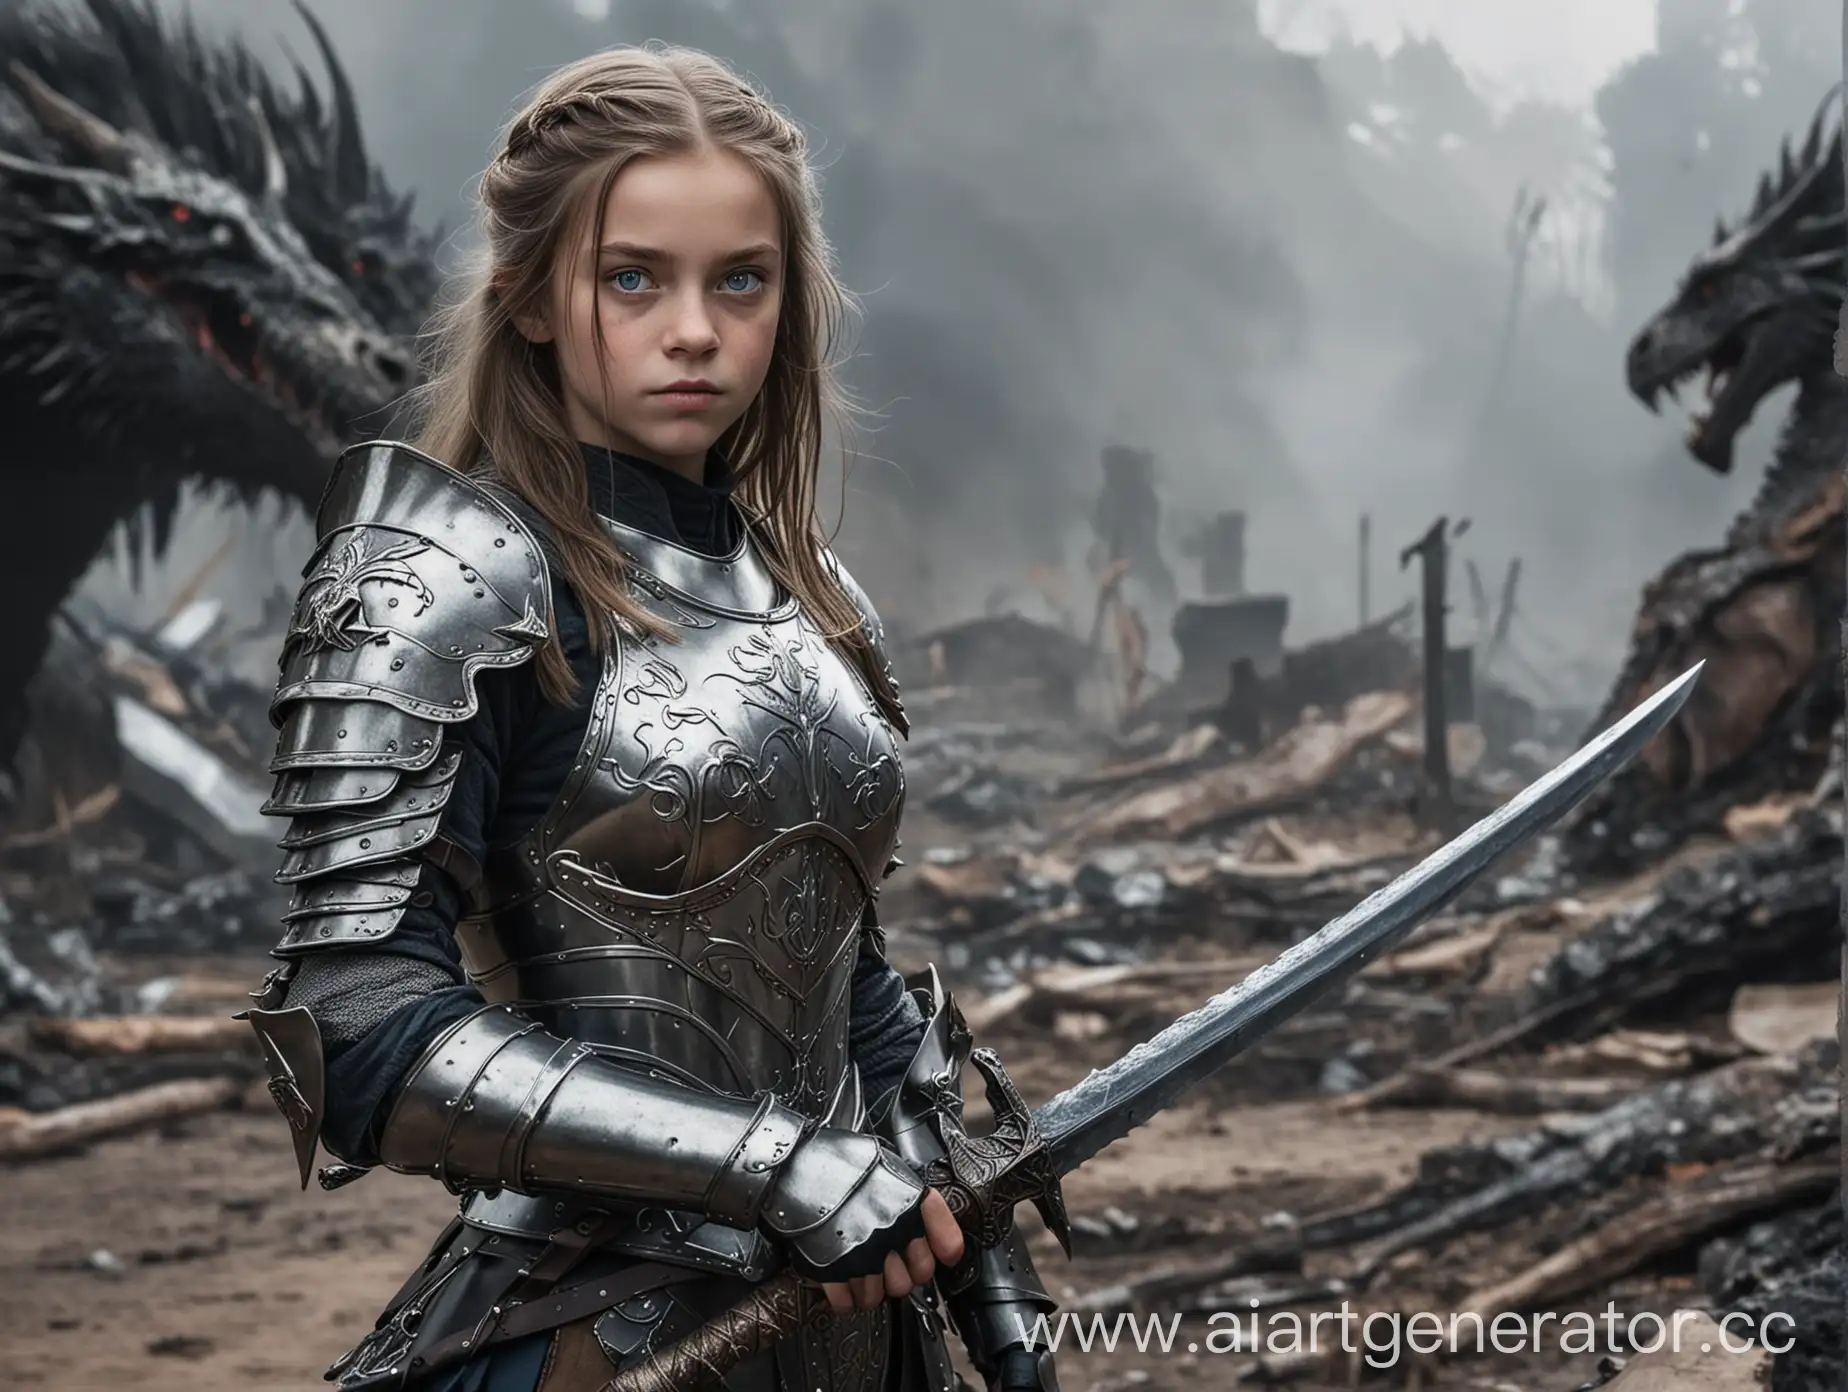 young girl, medium length hair, blue eyes, in armor, with a sword in her hands, against the background of a killed dragon